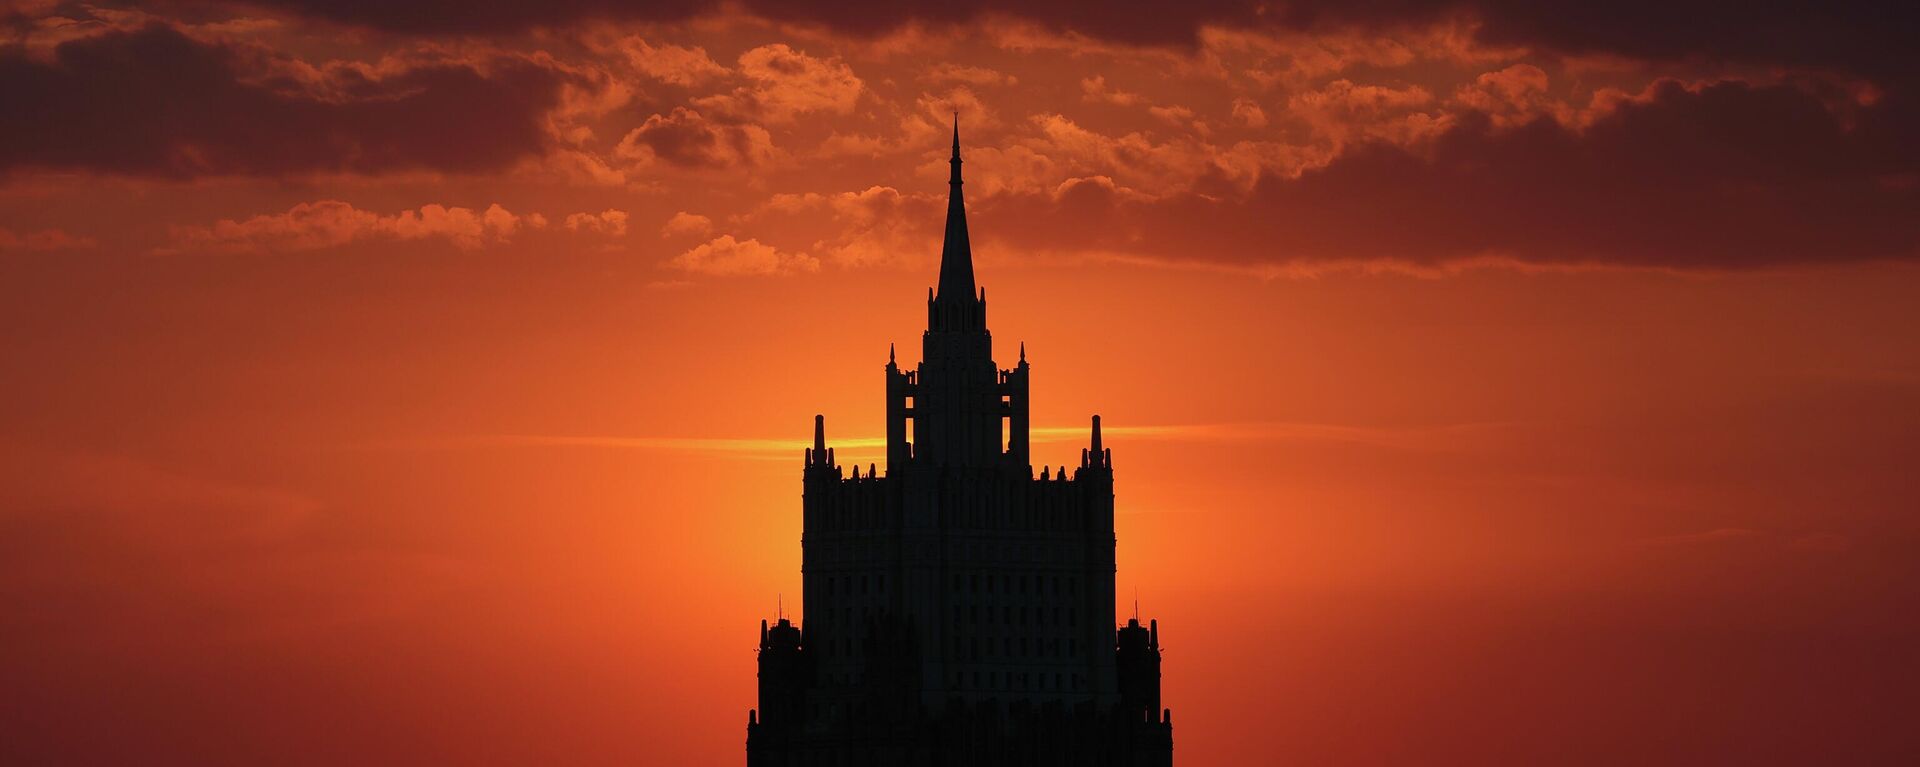 The building of the Ministry of Foreign Affairs of the Russian Federation in Moscow at sunset. - Sputnik International, 1920, 23.12.2022